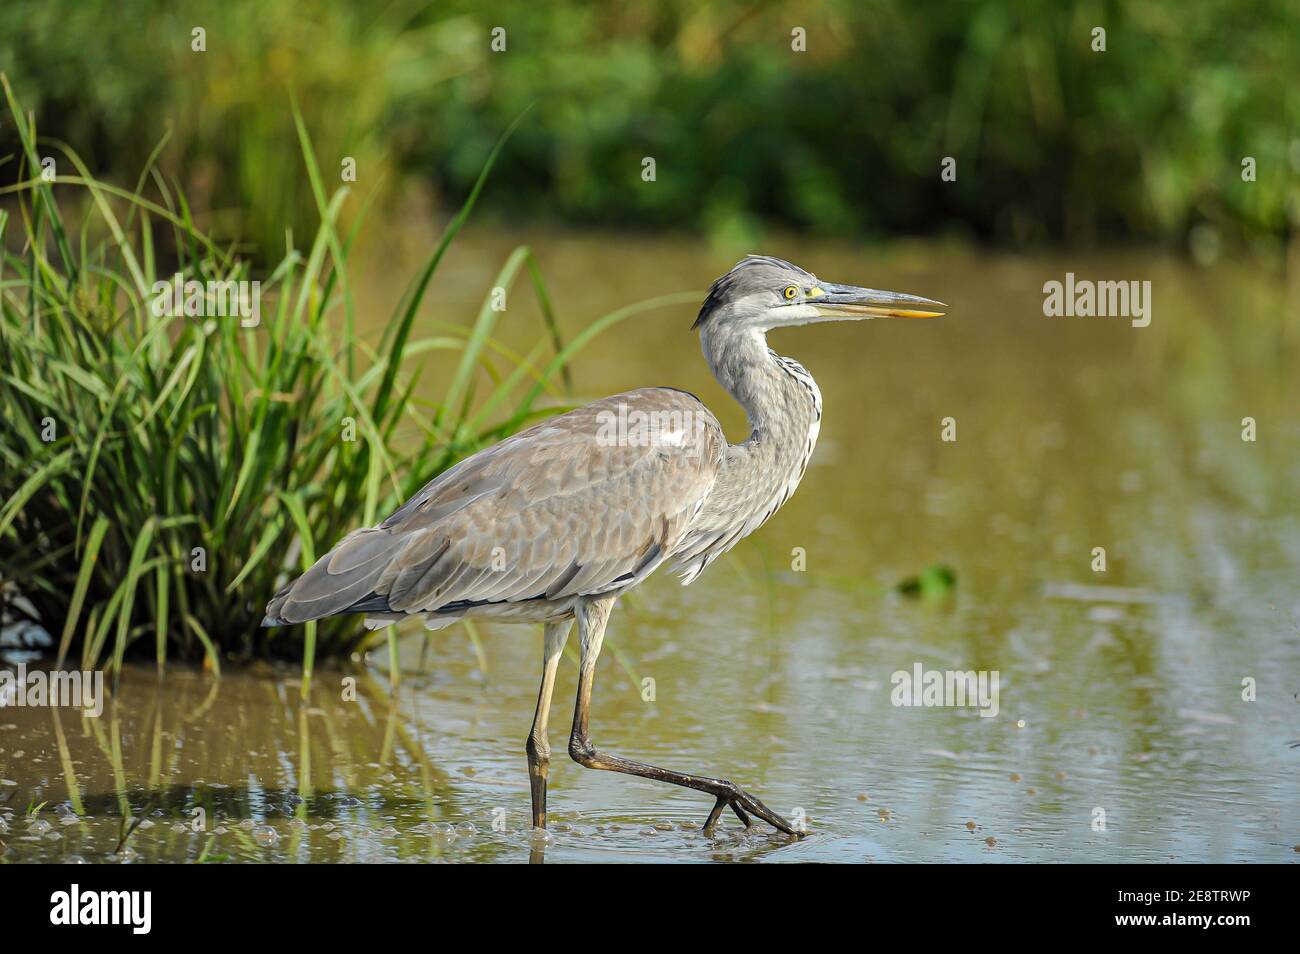 Grey Heron on the banks of the River Nile in Uganda, Africa. Stock Photo